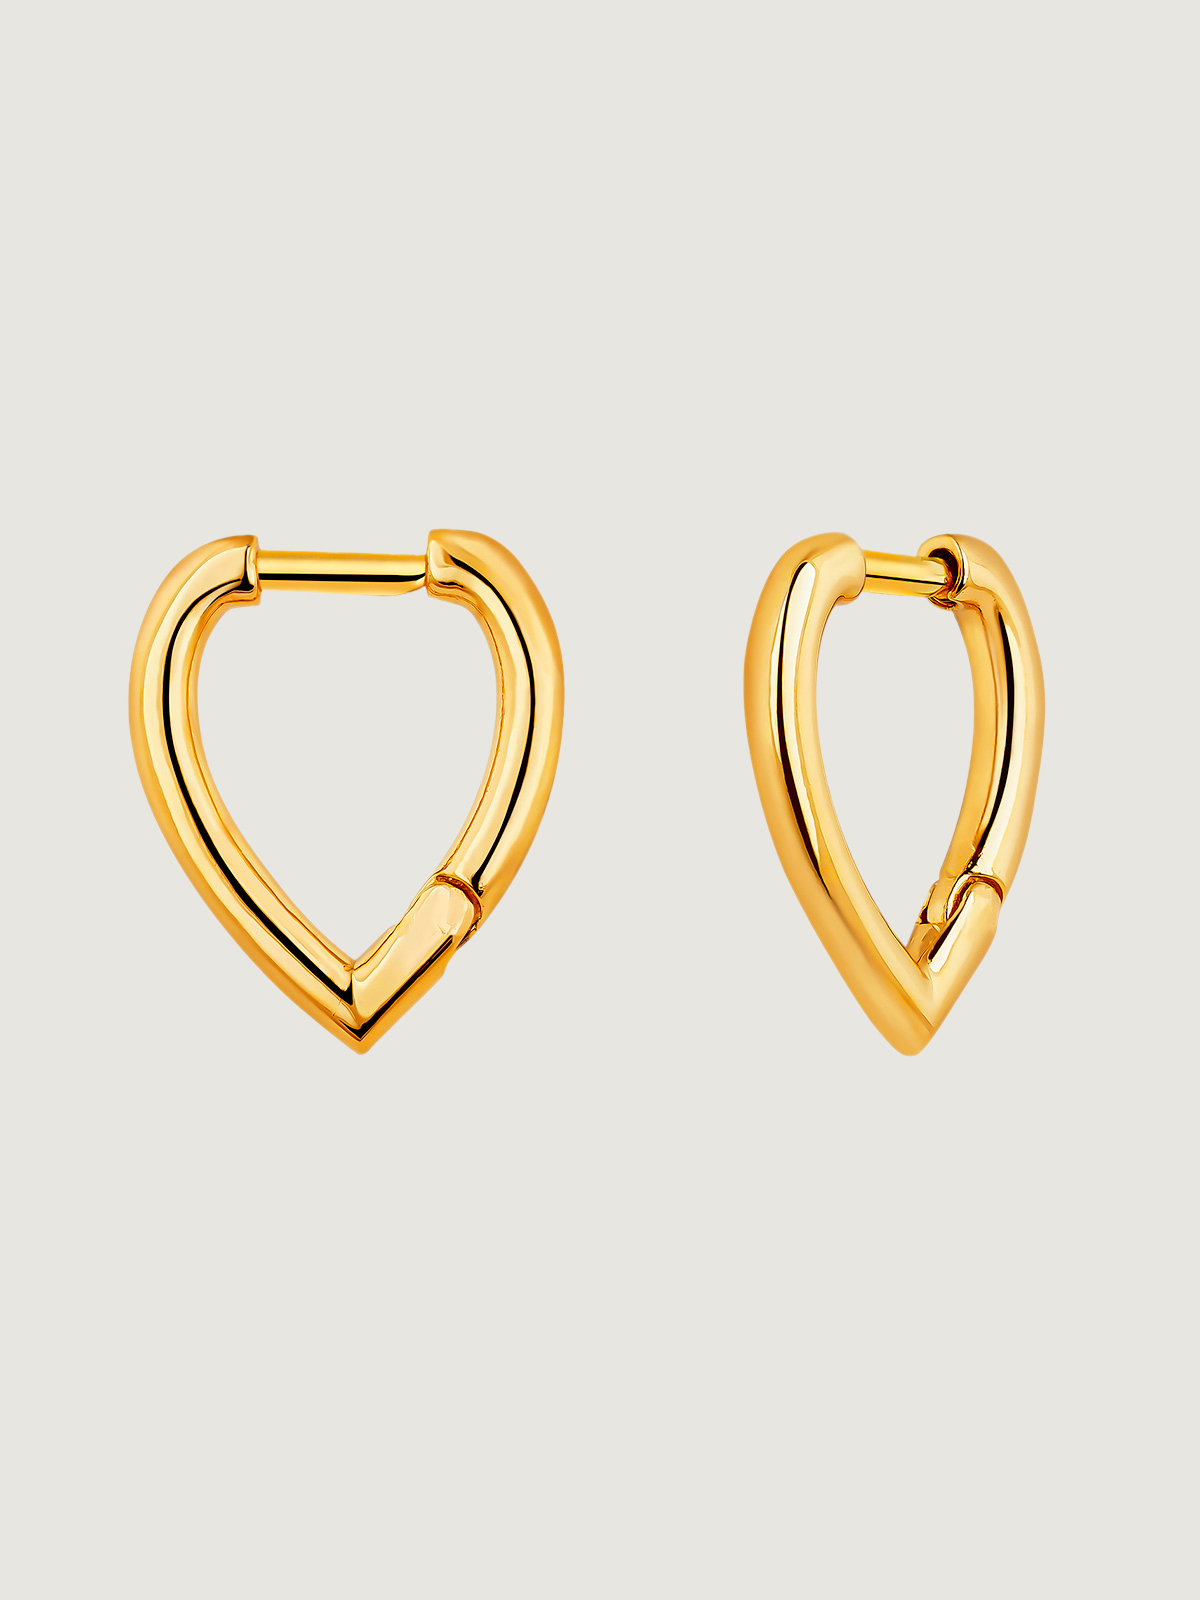 Drop-shaped earrings made of 925 silver coated in 18K yellow gold